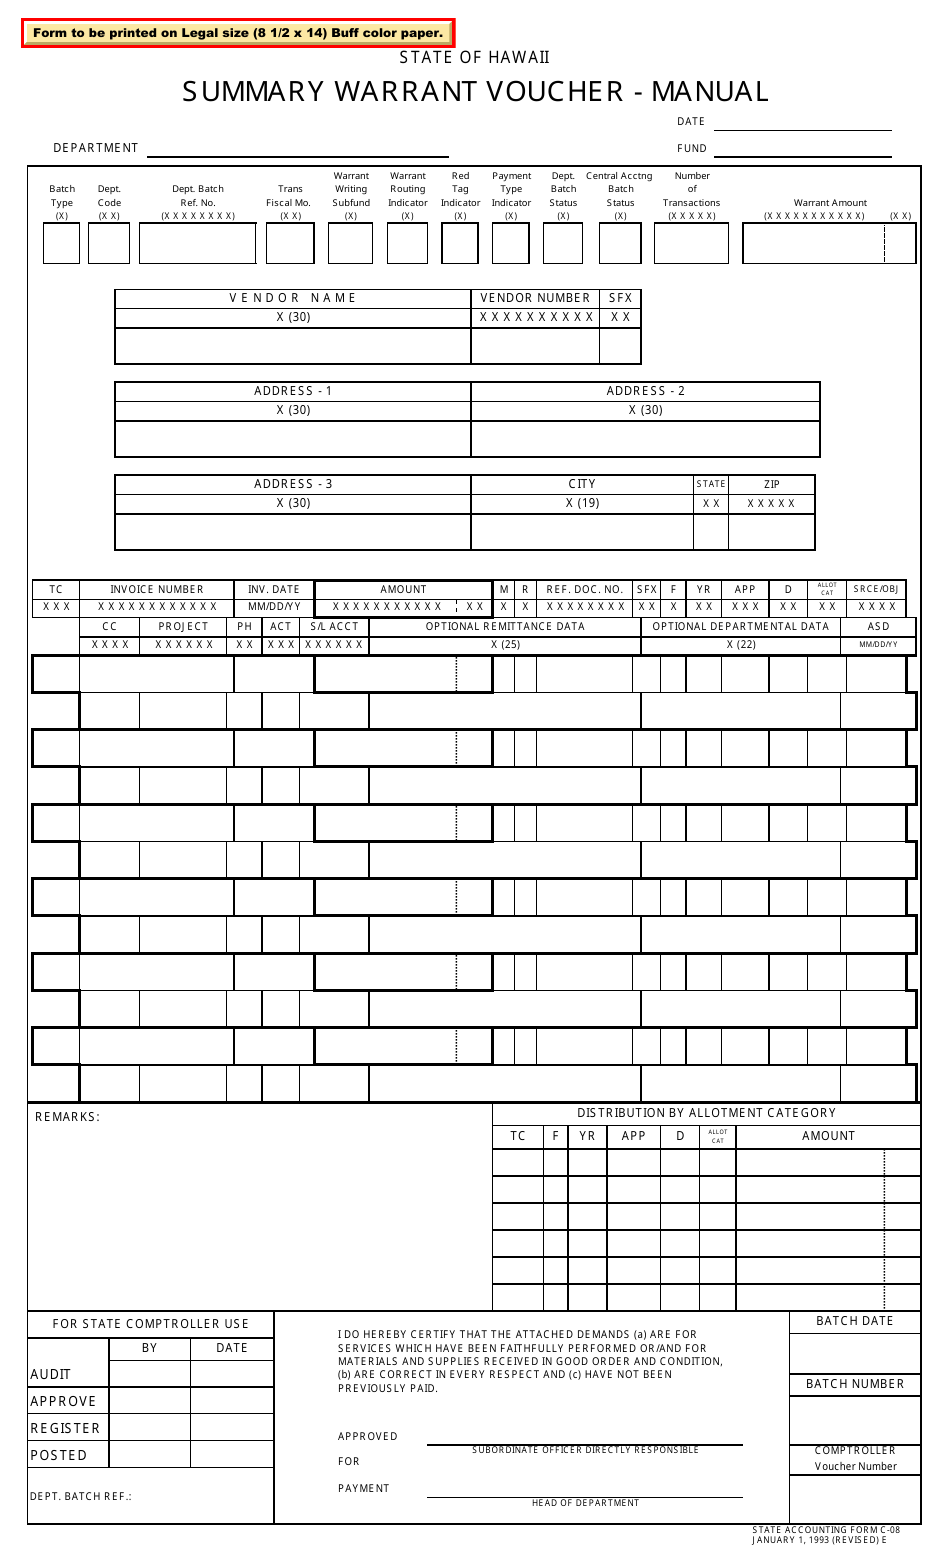 Form C-08 Summary Warrant Voucher - Manual - Hawaii, Page 1